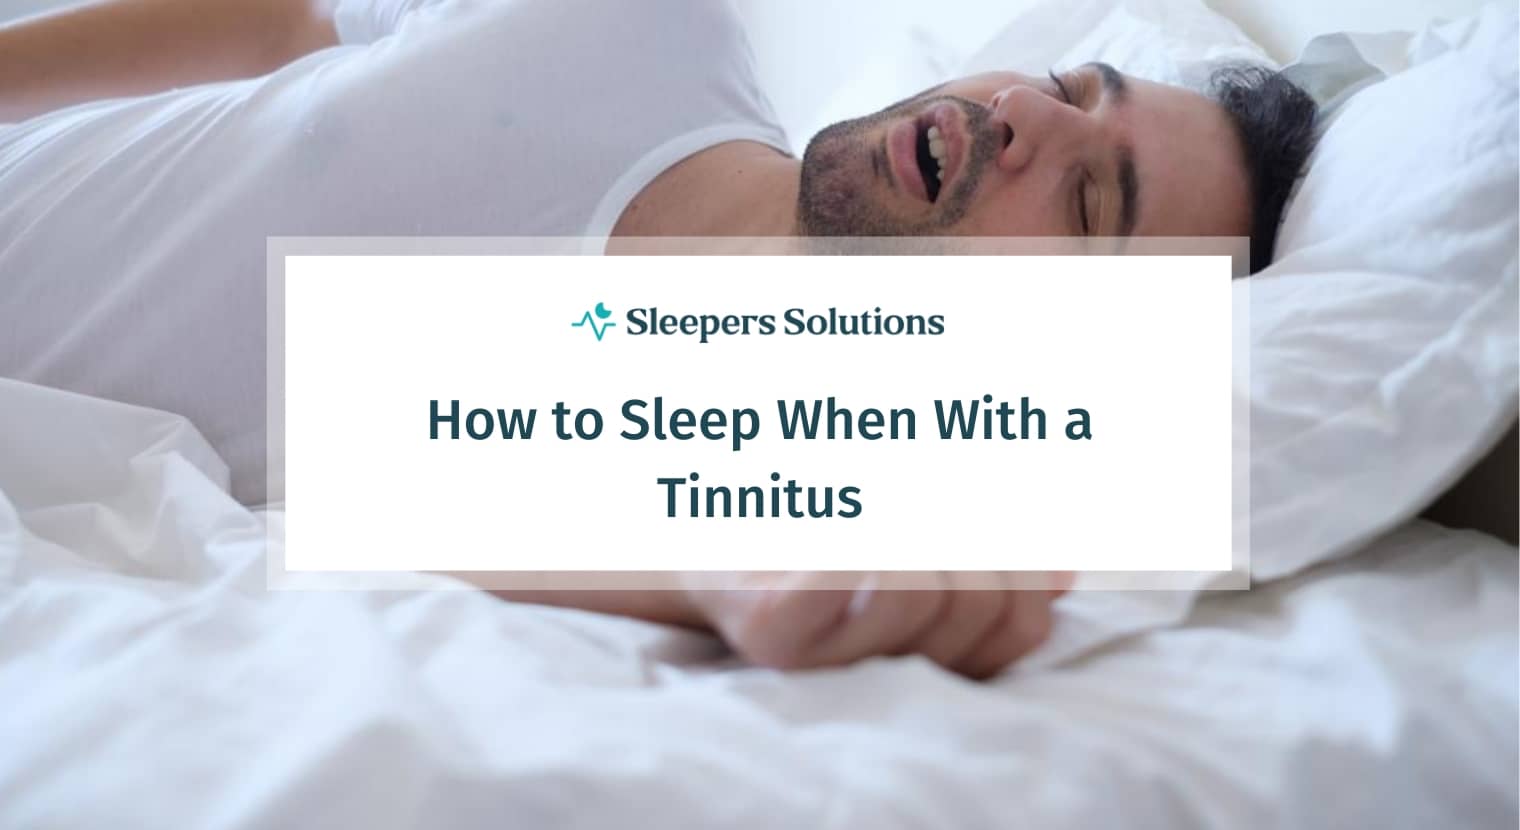 How to Sleep With Tinnitus In 3 Easy Steps